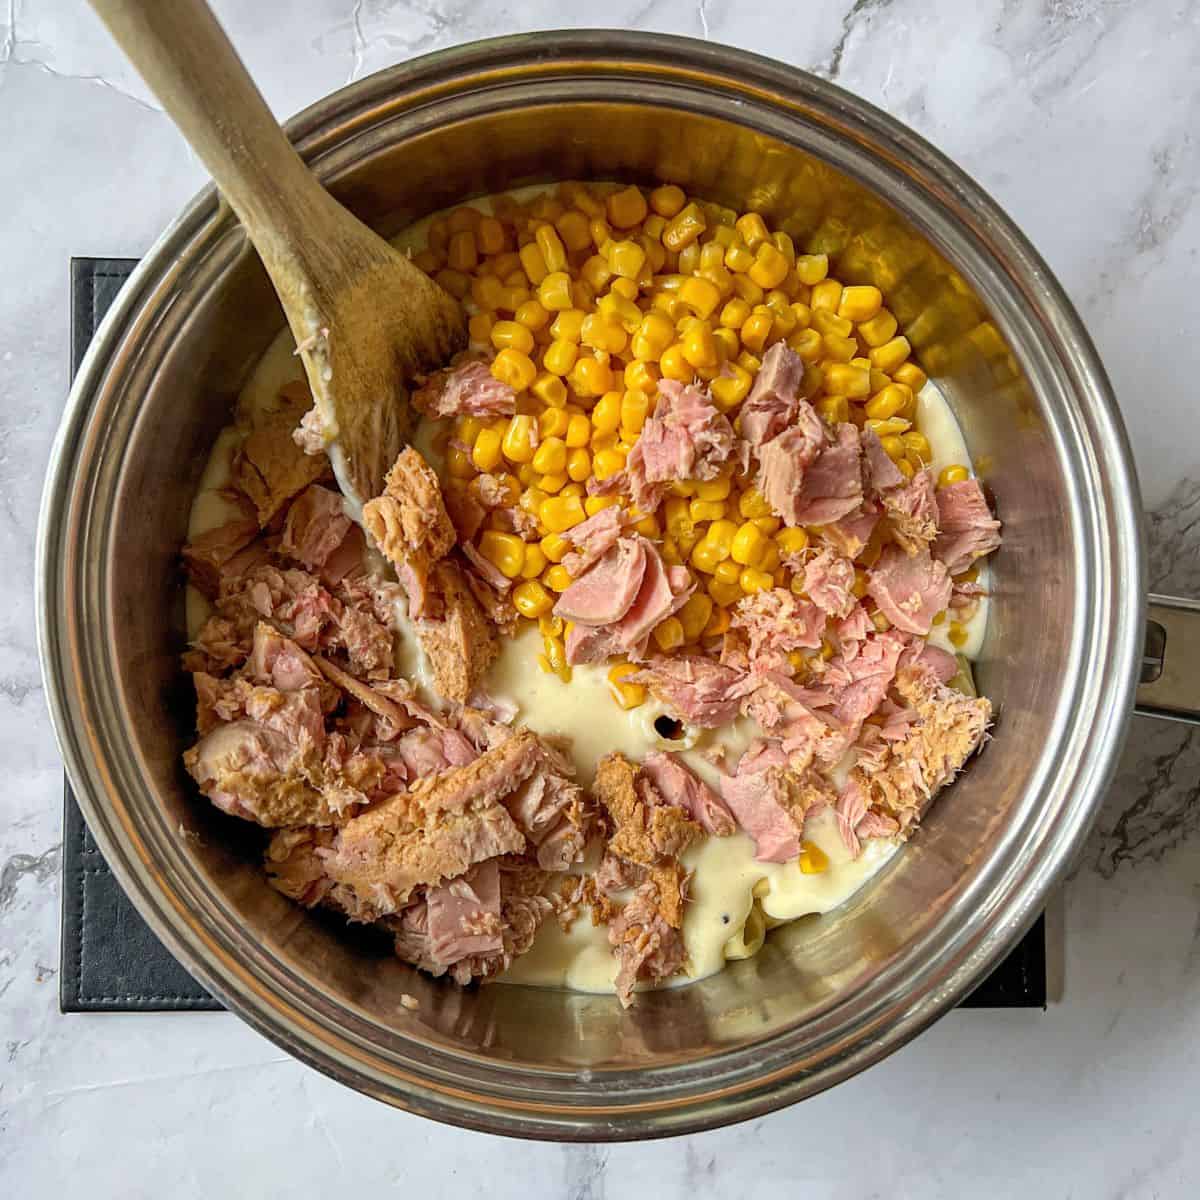 Tuna, sweetcorn and white sauce in a saucepan with a wooden spoon in it.